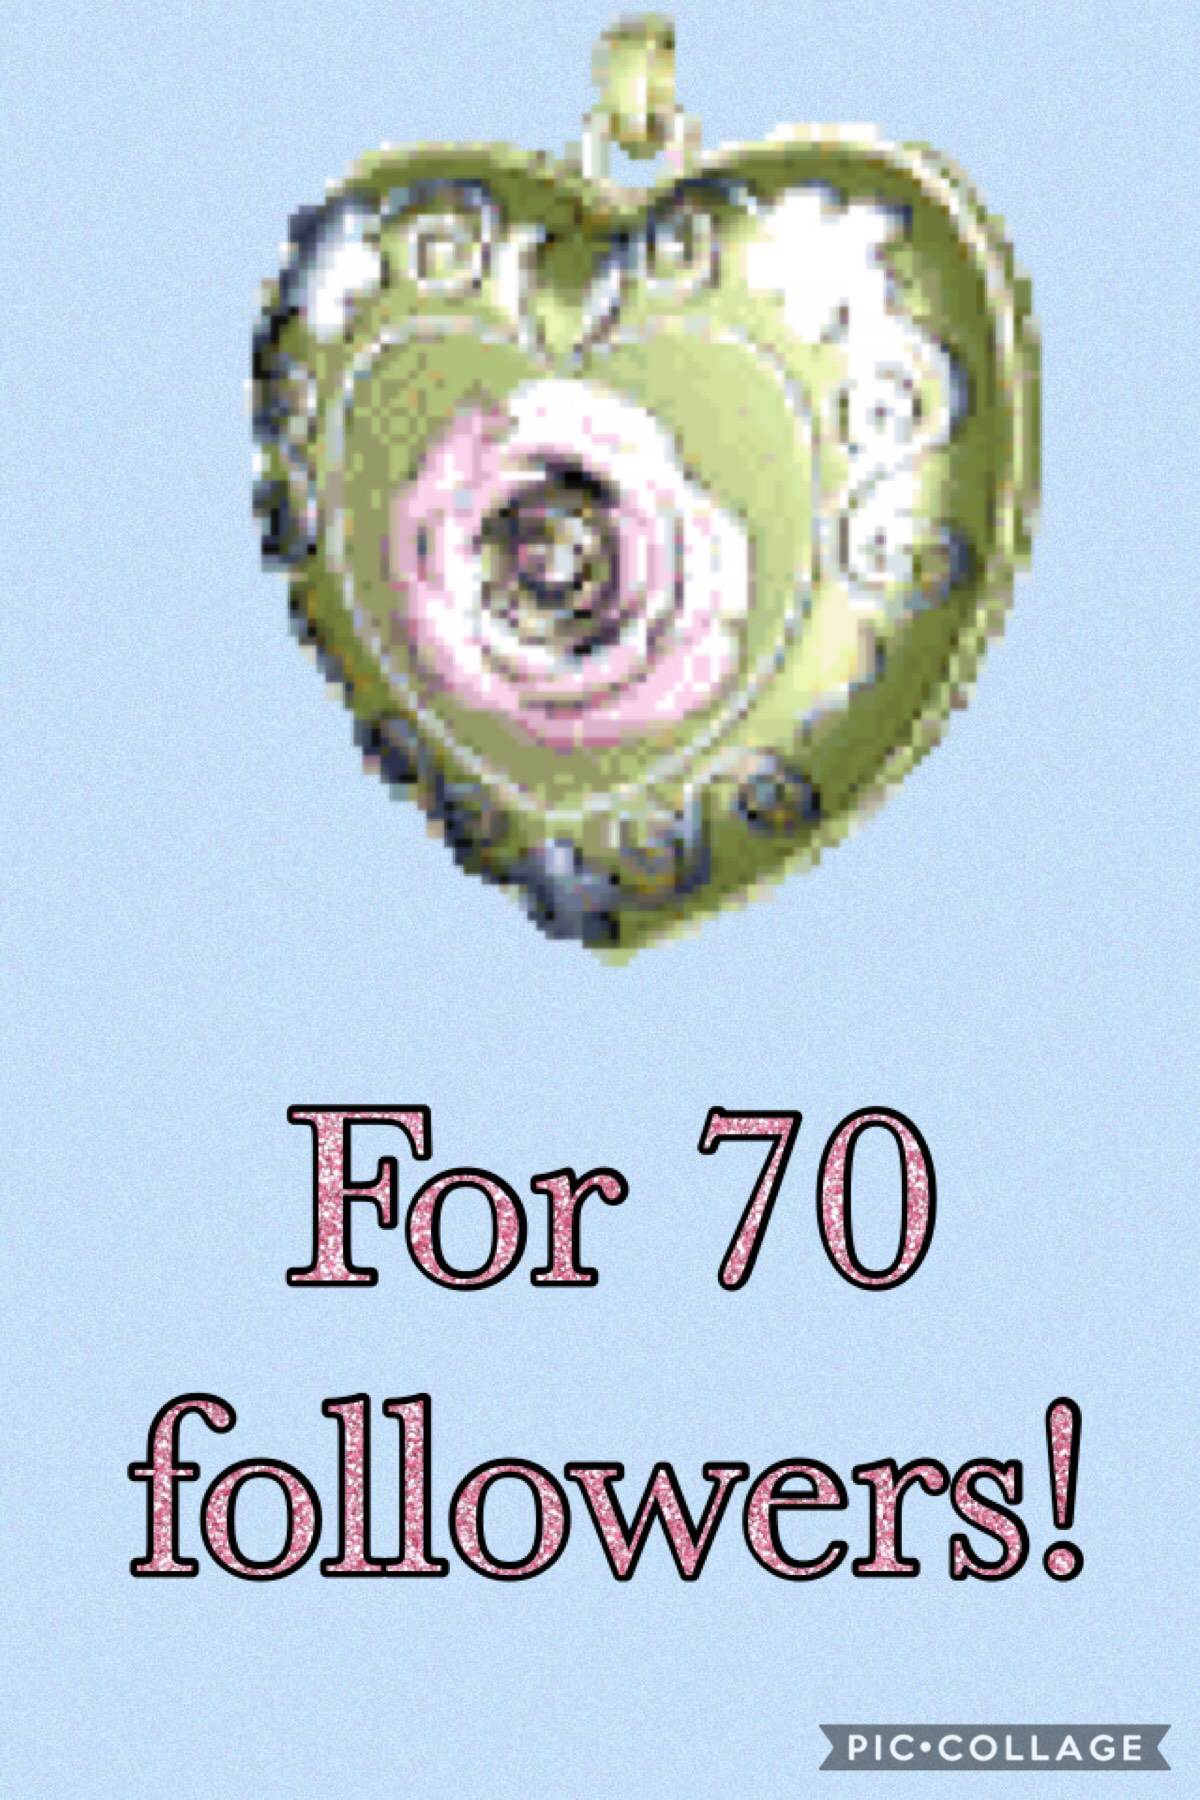 Thank you for 70 followers!